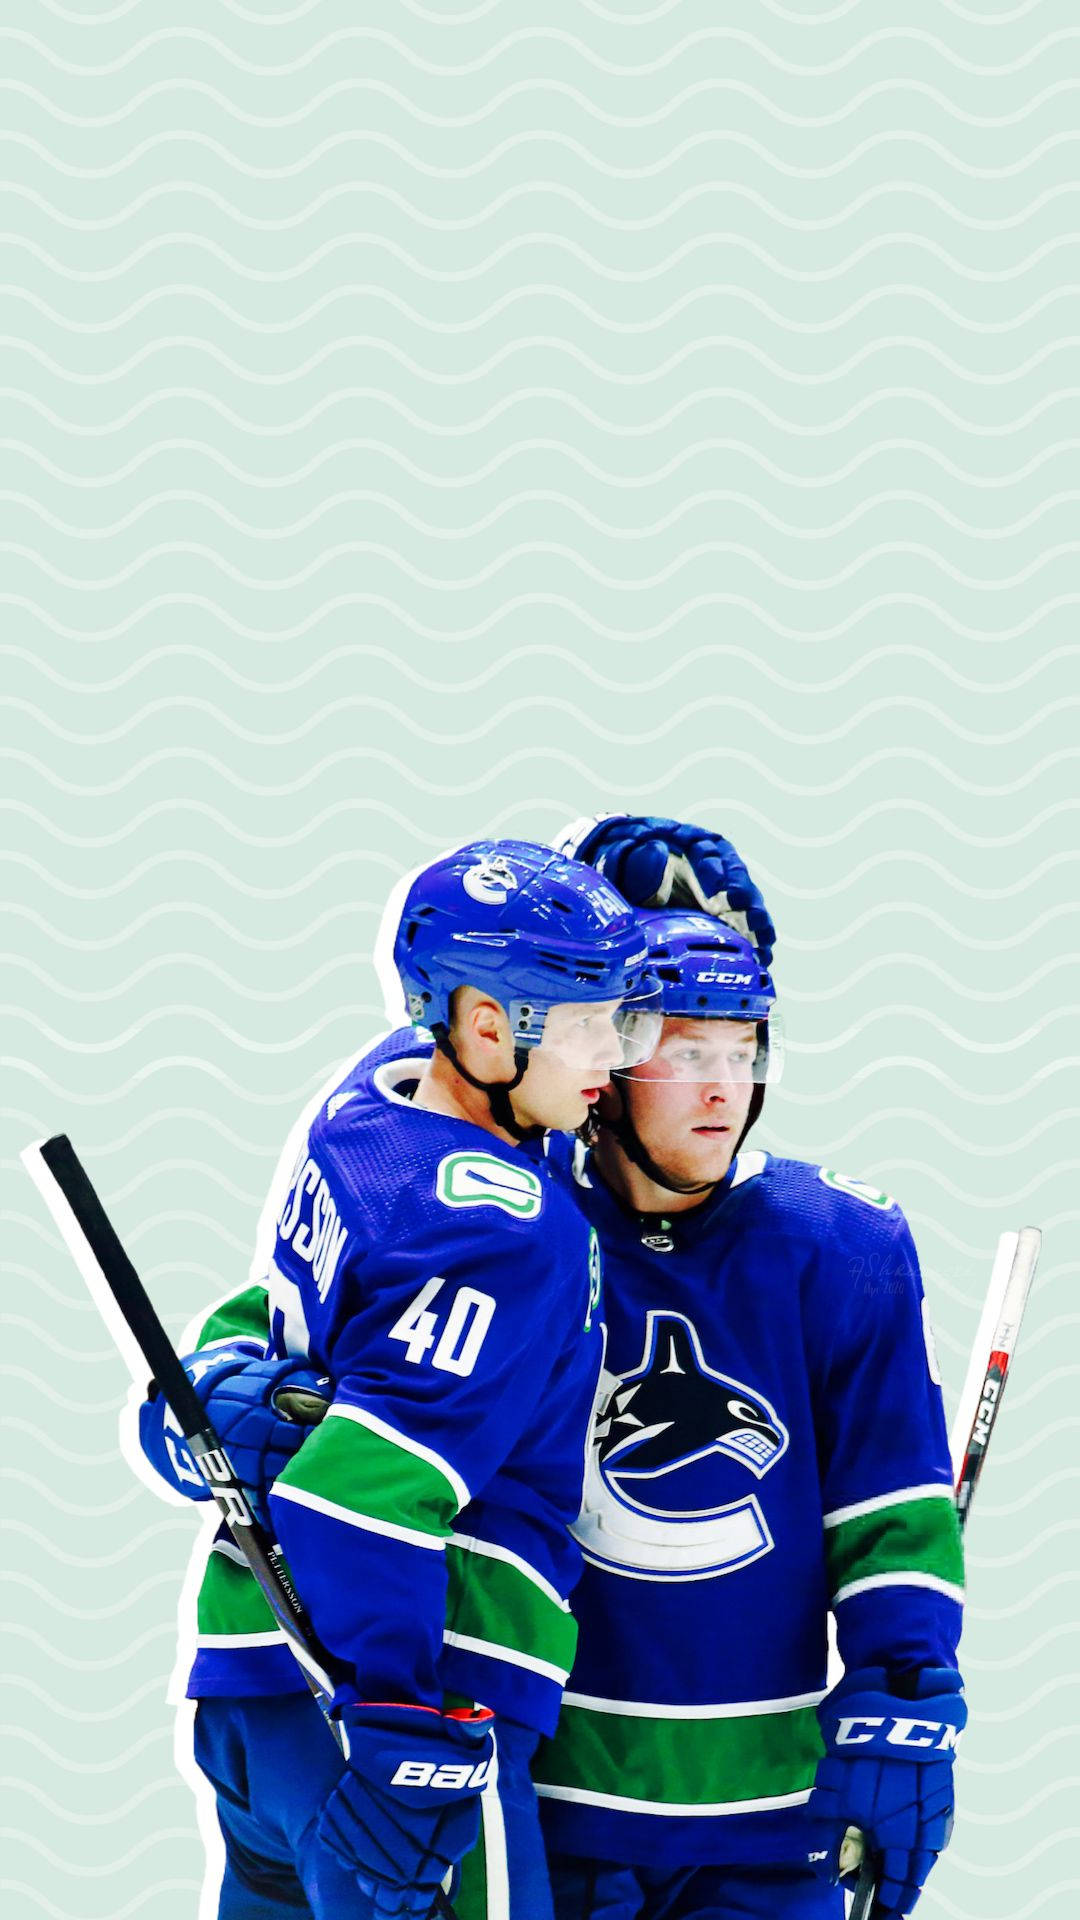 Canadian Nhl Player Elias Pettersson Minimalist Poster Background